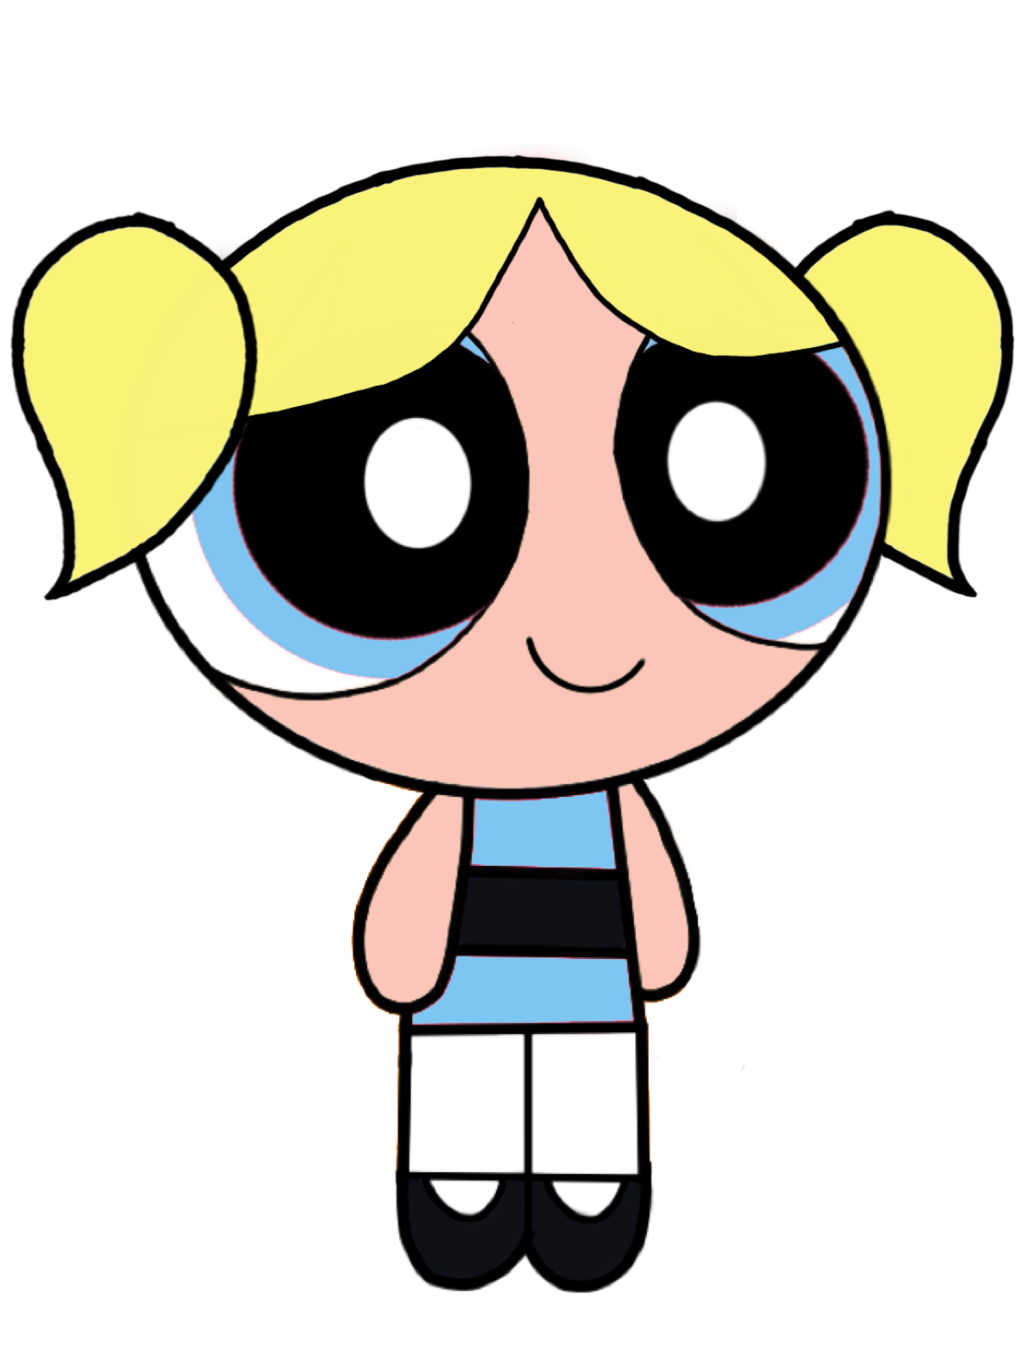 Download PNG image - Bubbles Powerpuff Girls PNG File Download Free 